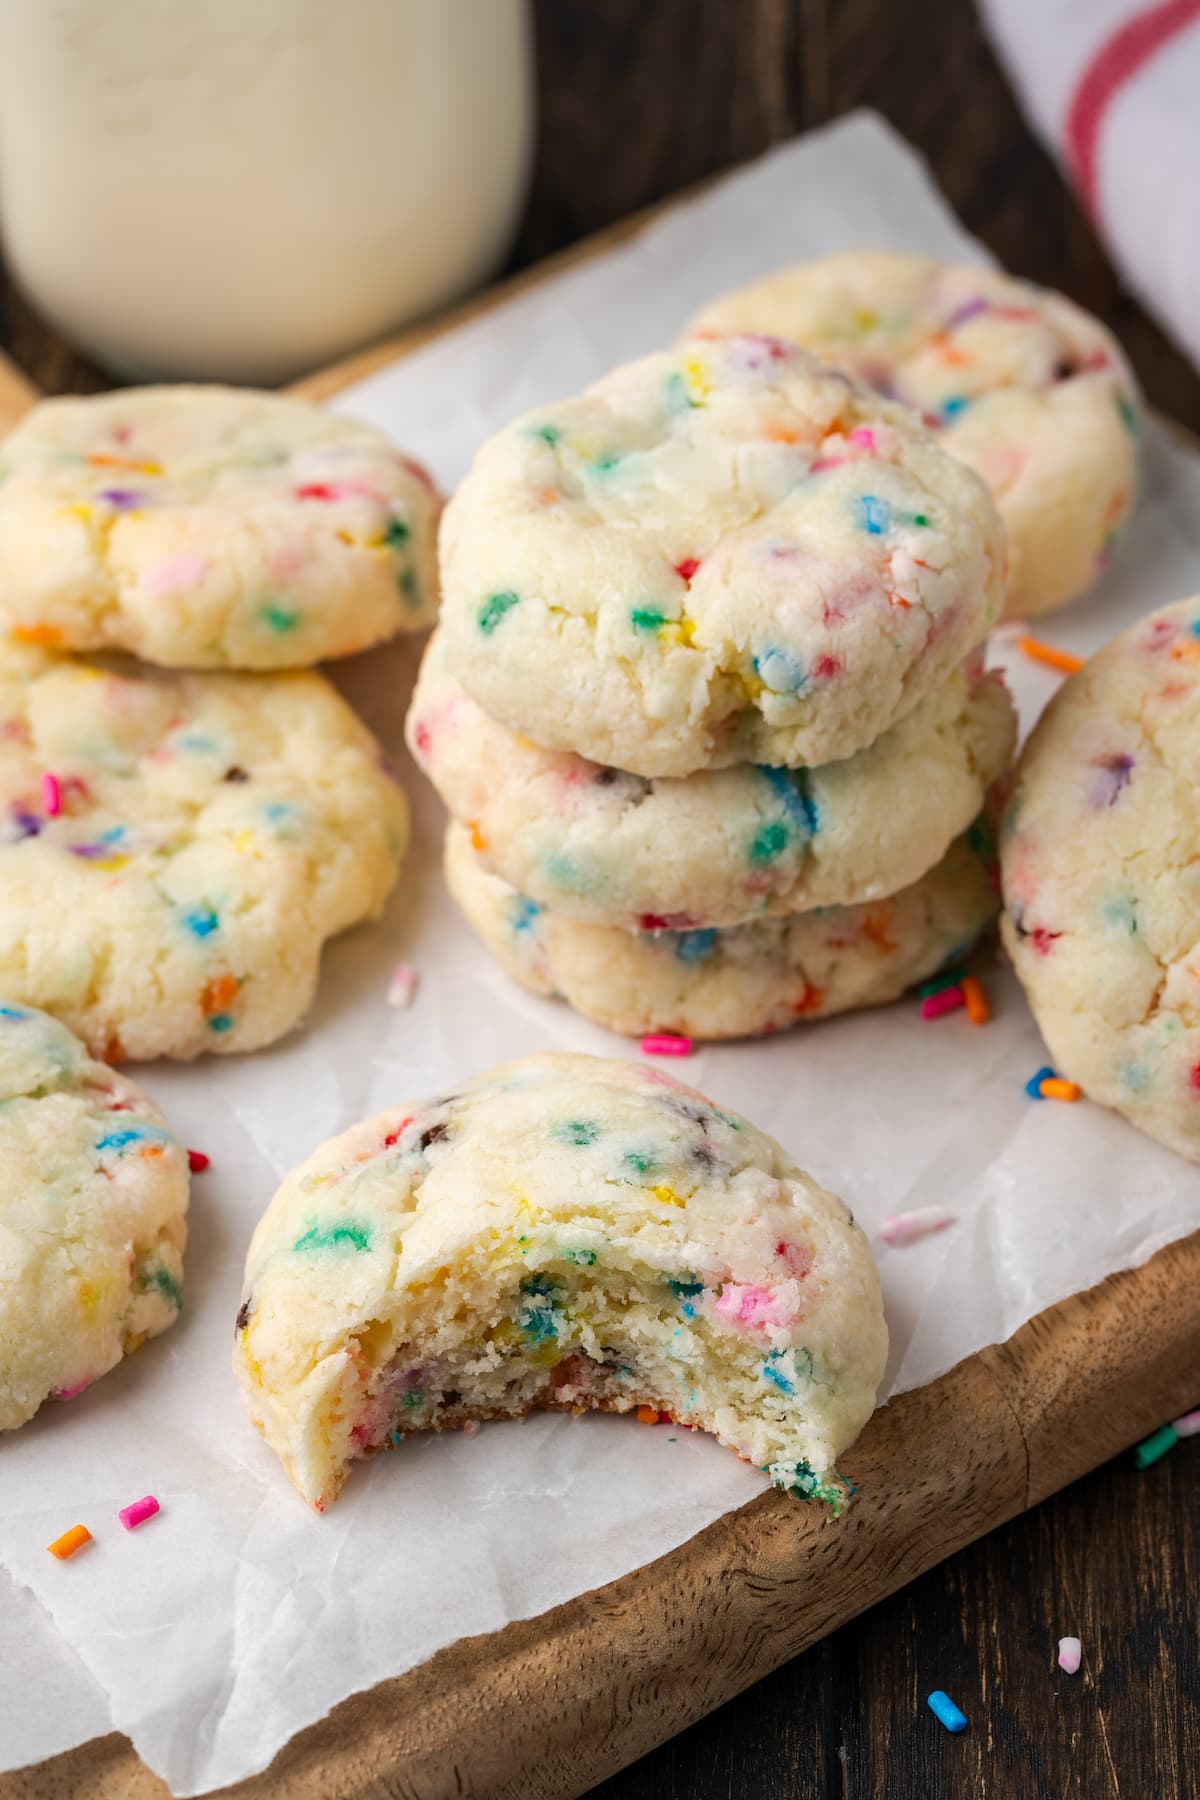 Stacks of funfetti cookies on a parchment-lined wooden cutting board, next to one cookie with a bite missing.